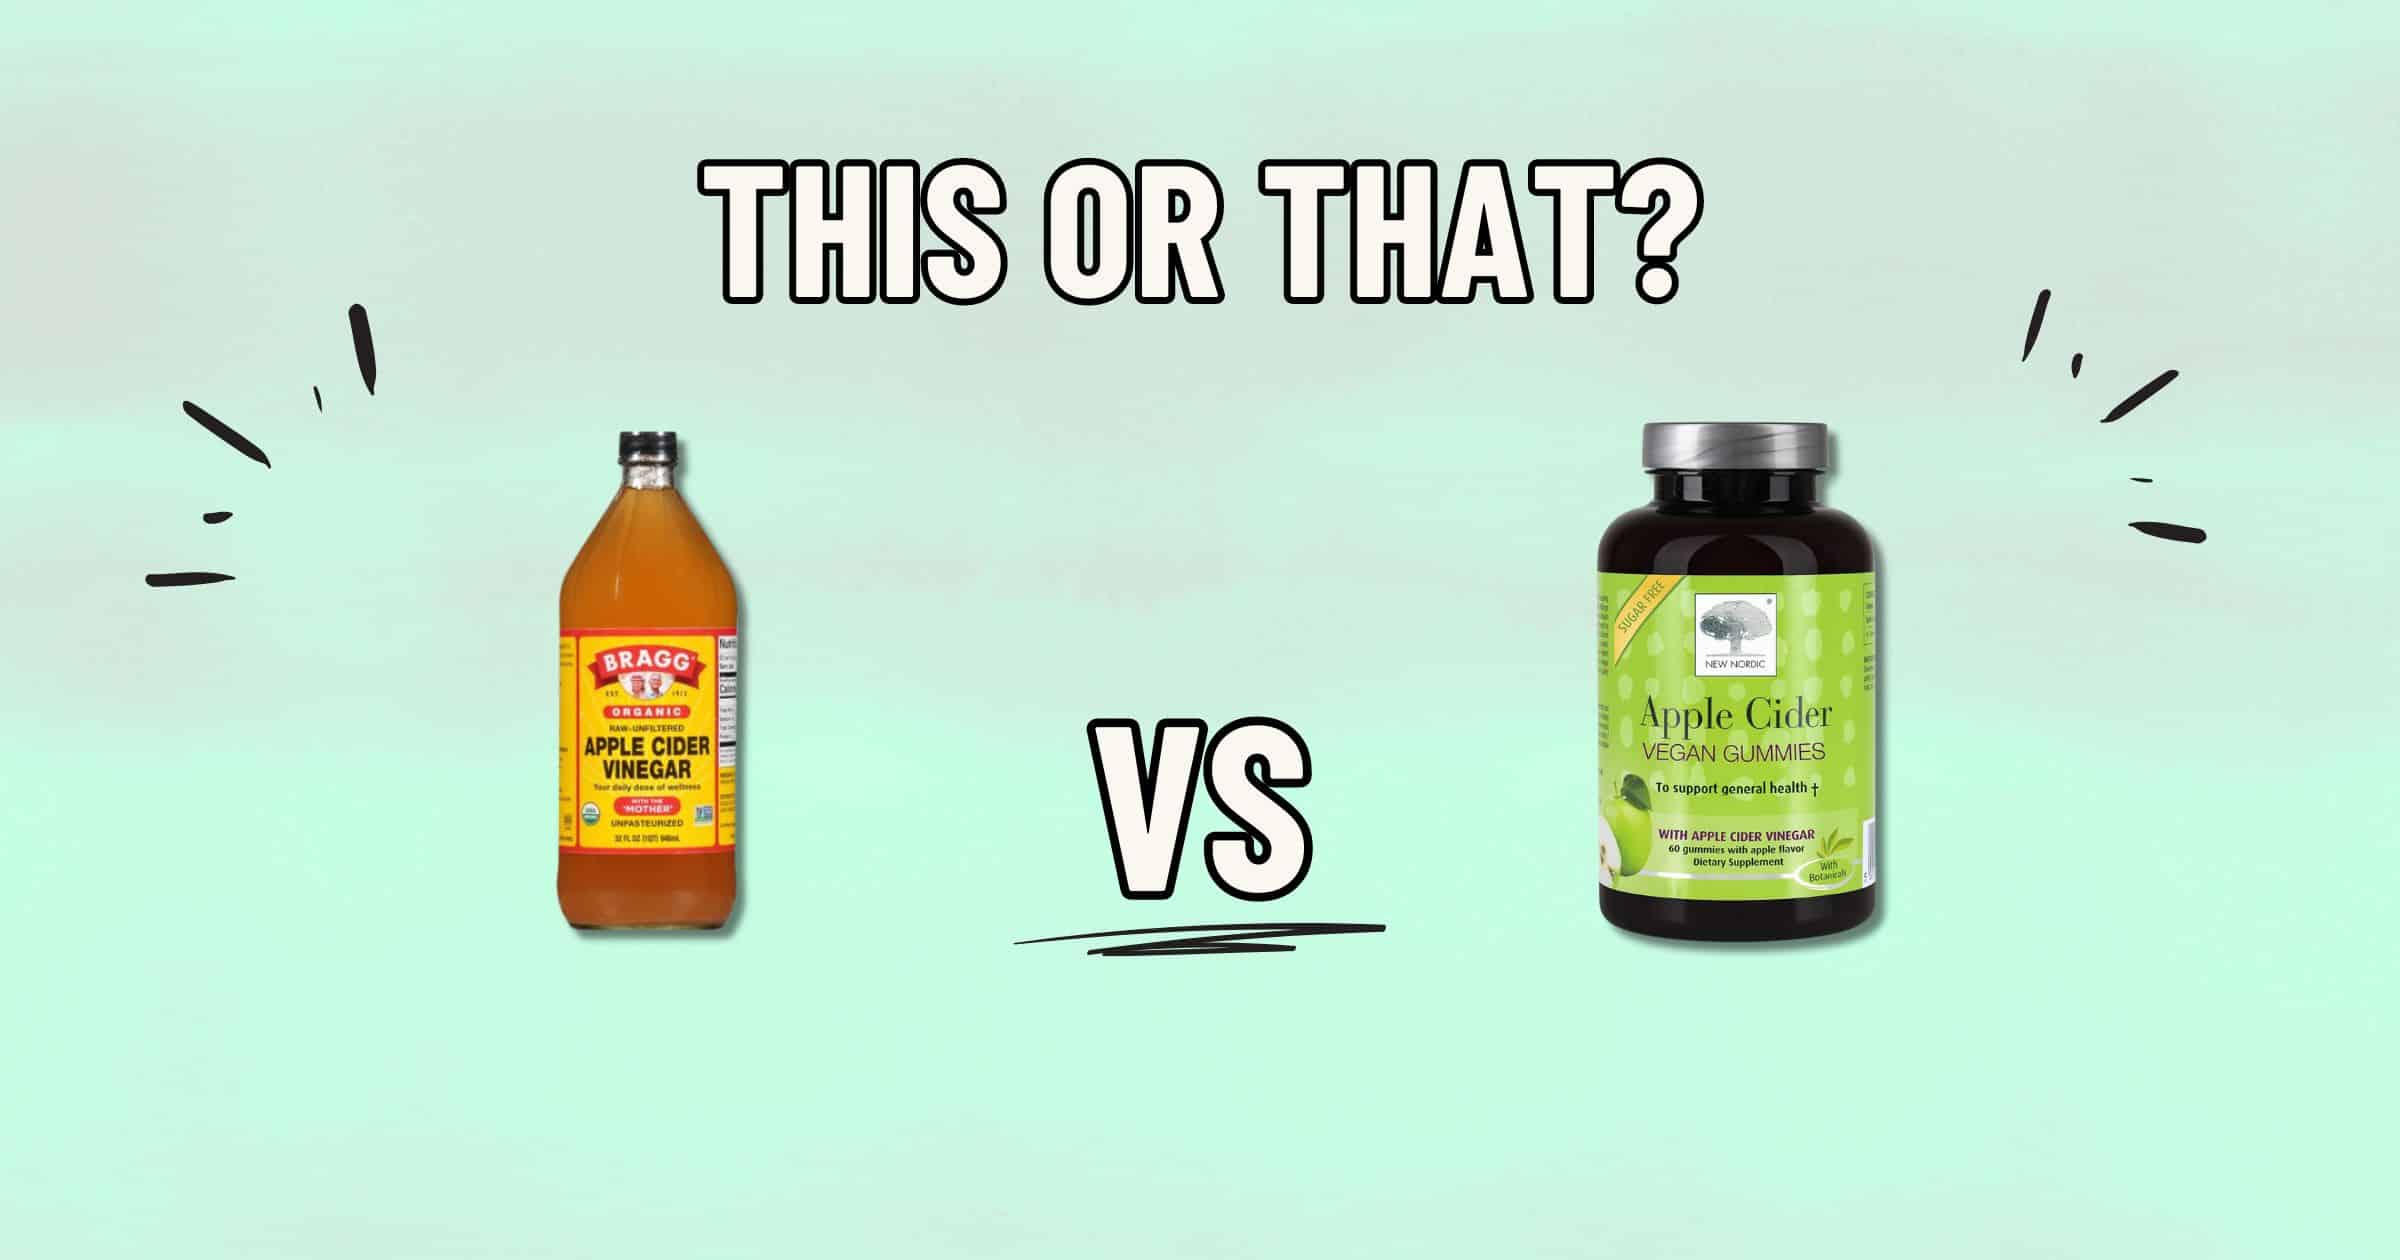 A bottle of Bragg Organic Apple Cider Vinegar on the left and a bottle of healthier Apple Cider Vinegar Gummies on the right, with text "THIS OR THAT?" at the top and "VS" in the middle against a light blue background.